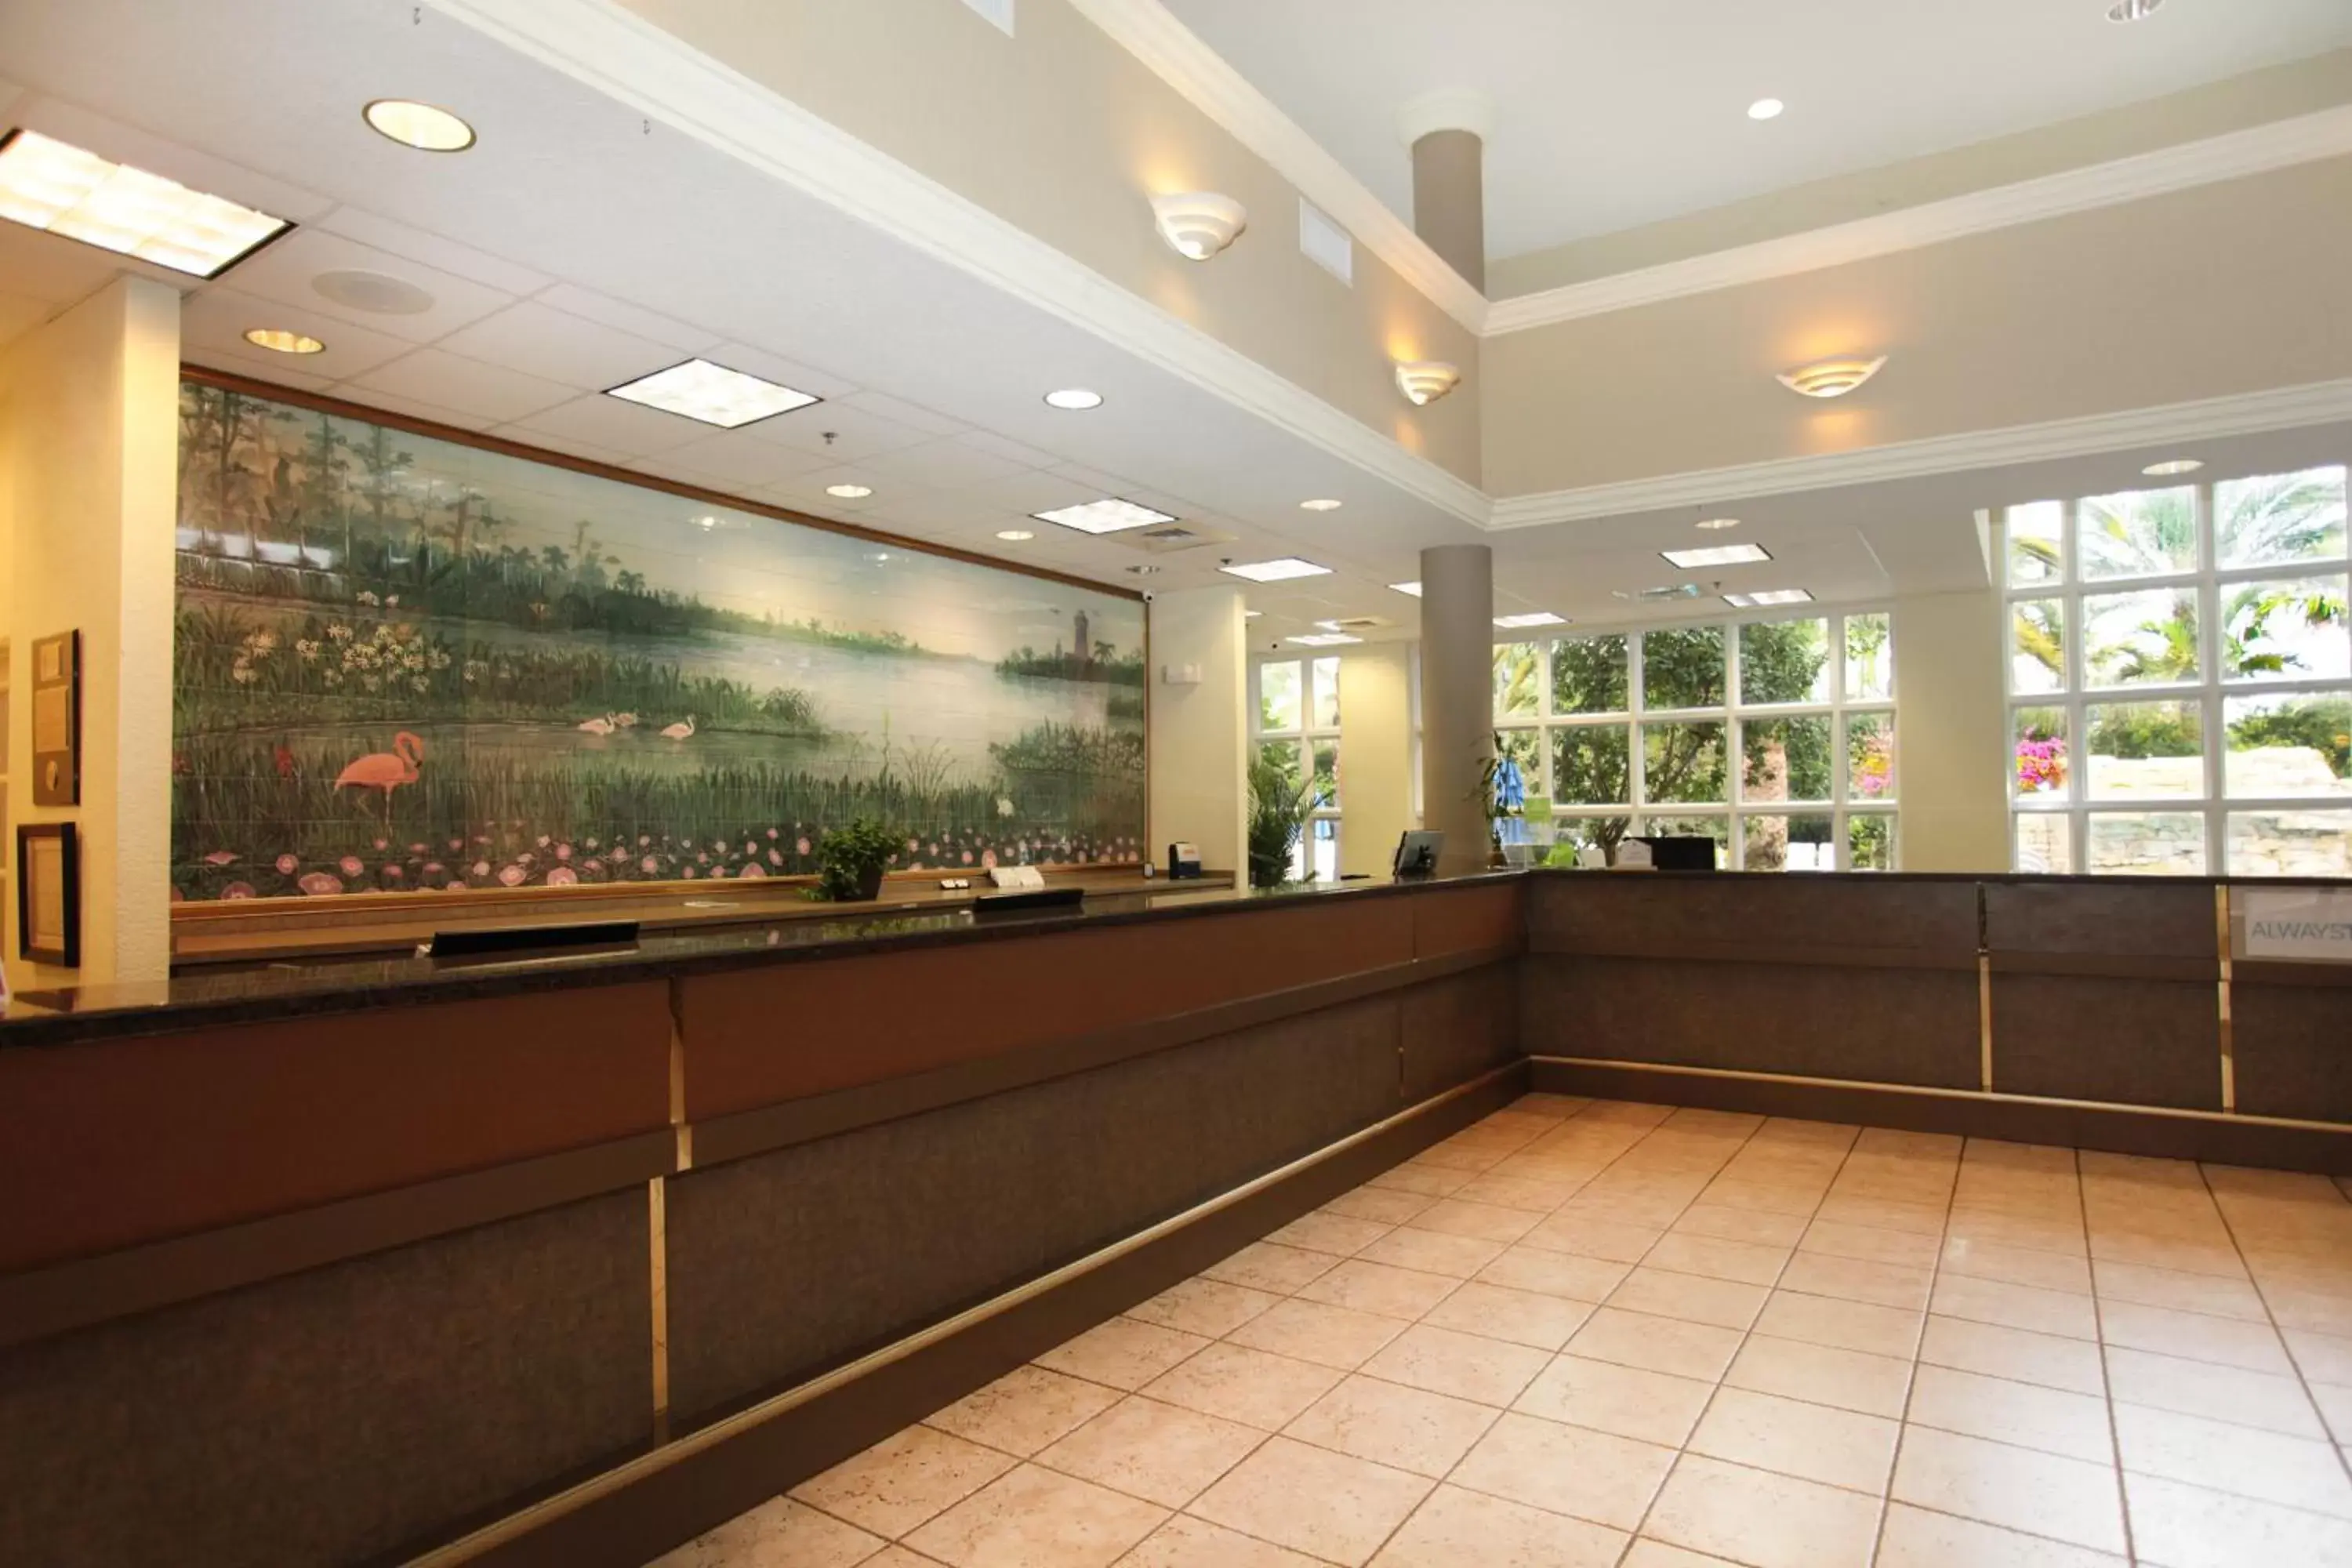 Lobby or reception in Vacation Village at Weston